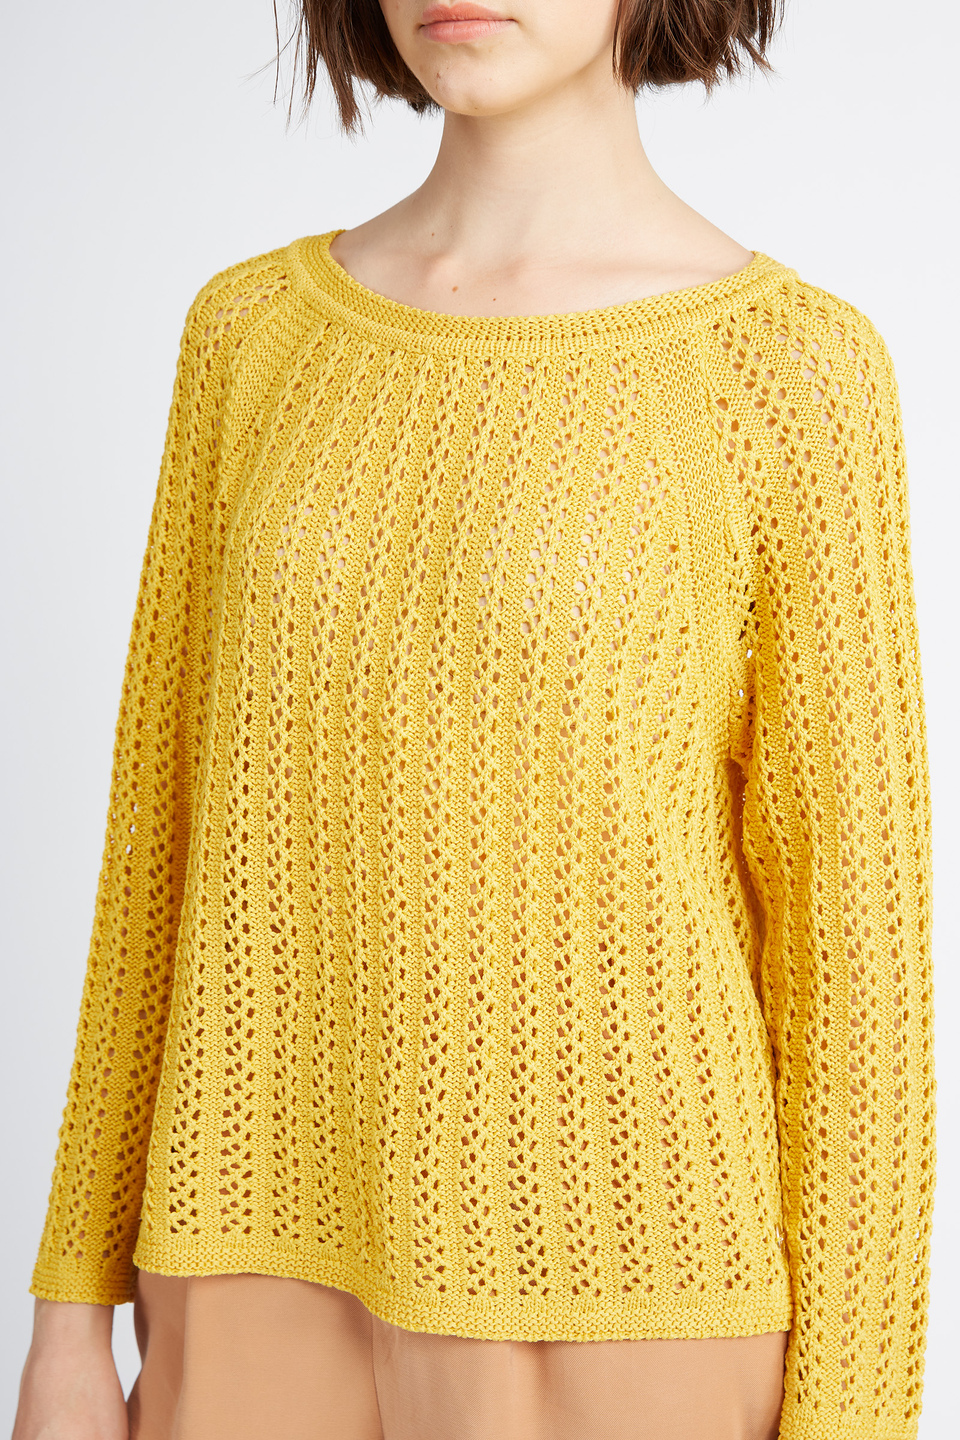 Women's round neck tricot sweater in solid color Spring Weekend capsule - Victoire | La Martina - Official Online Shop